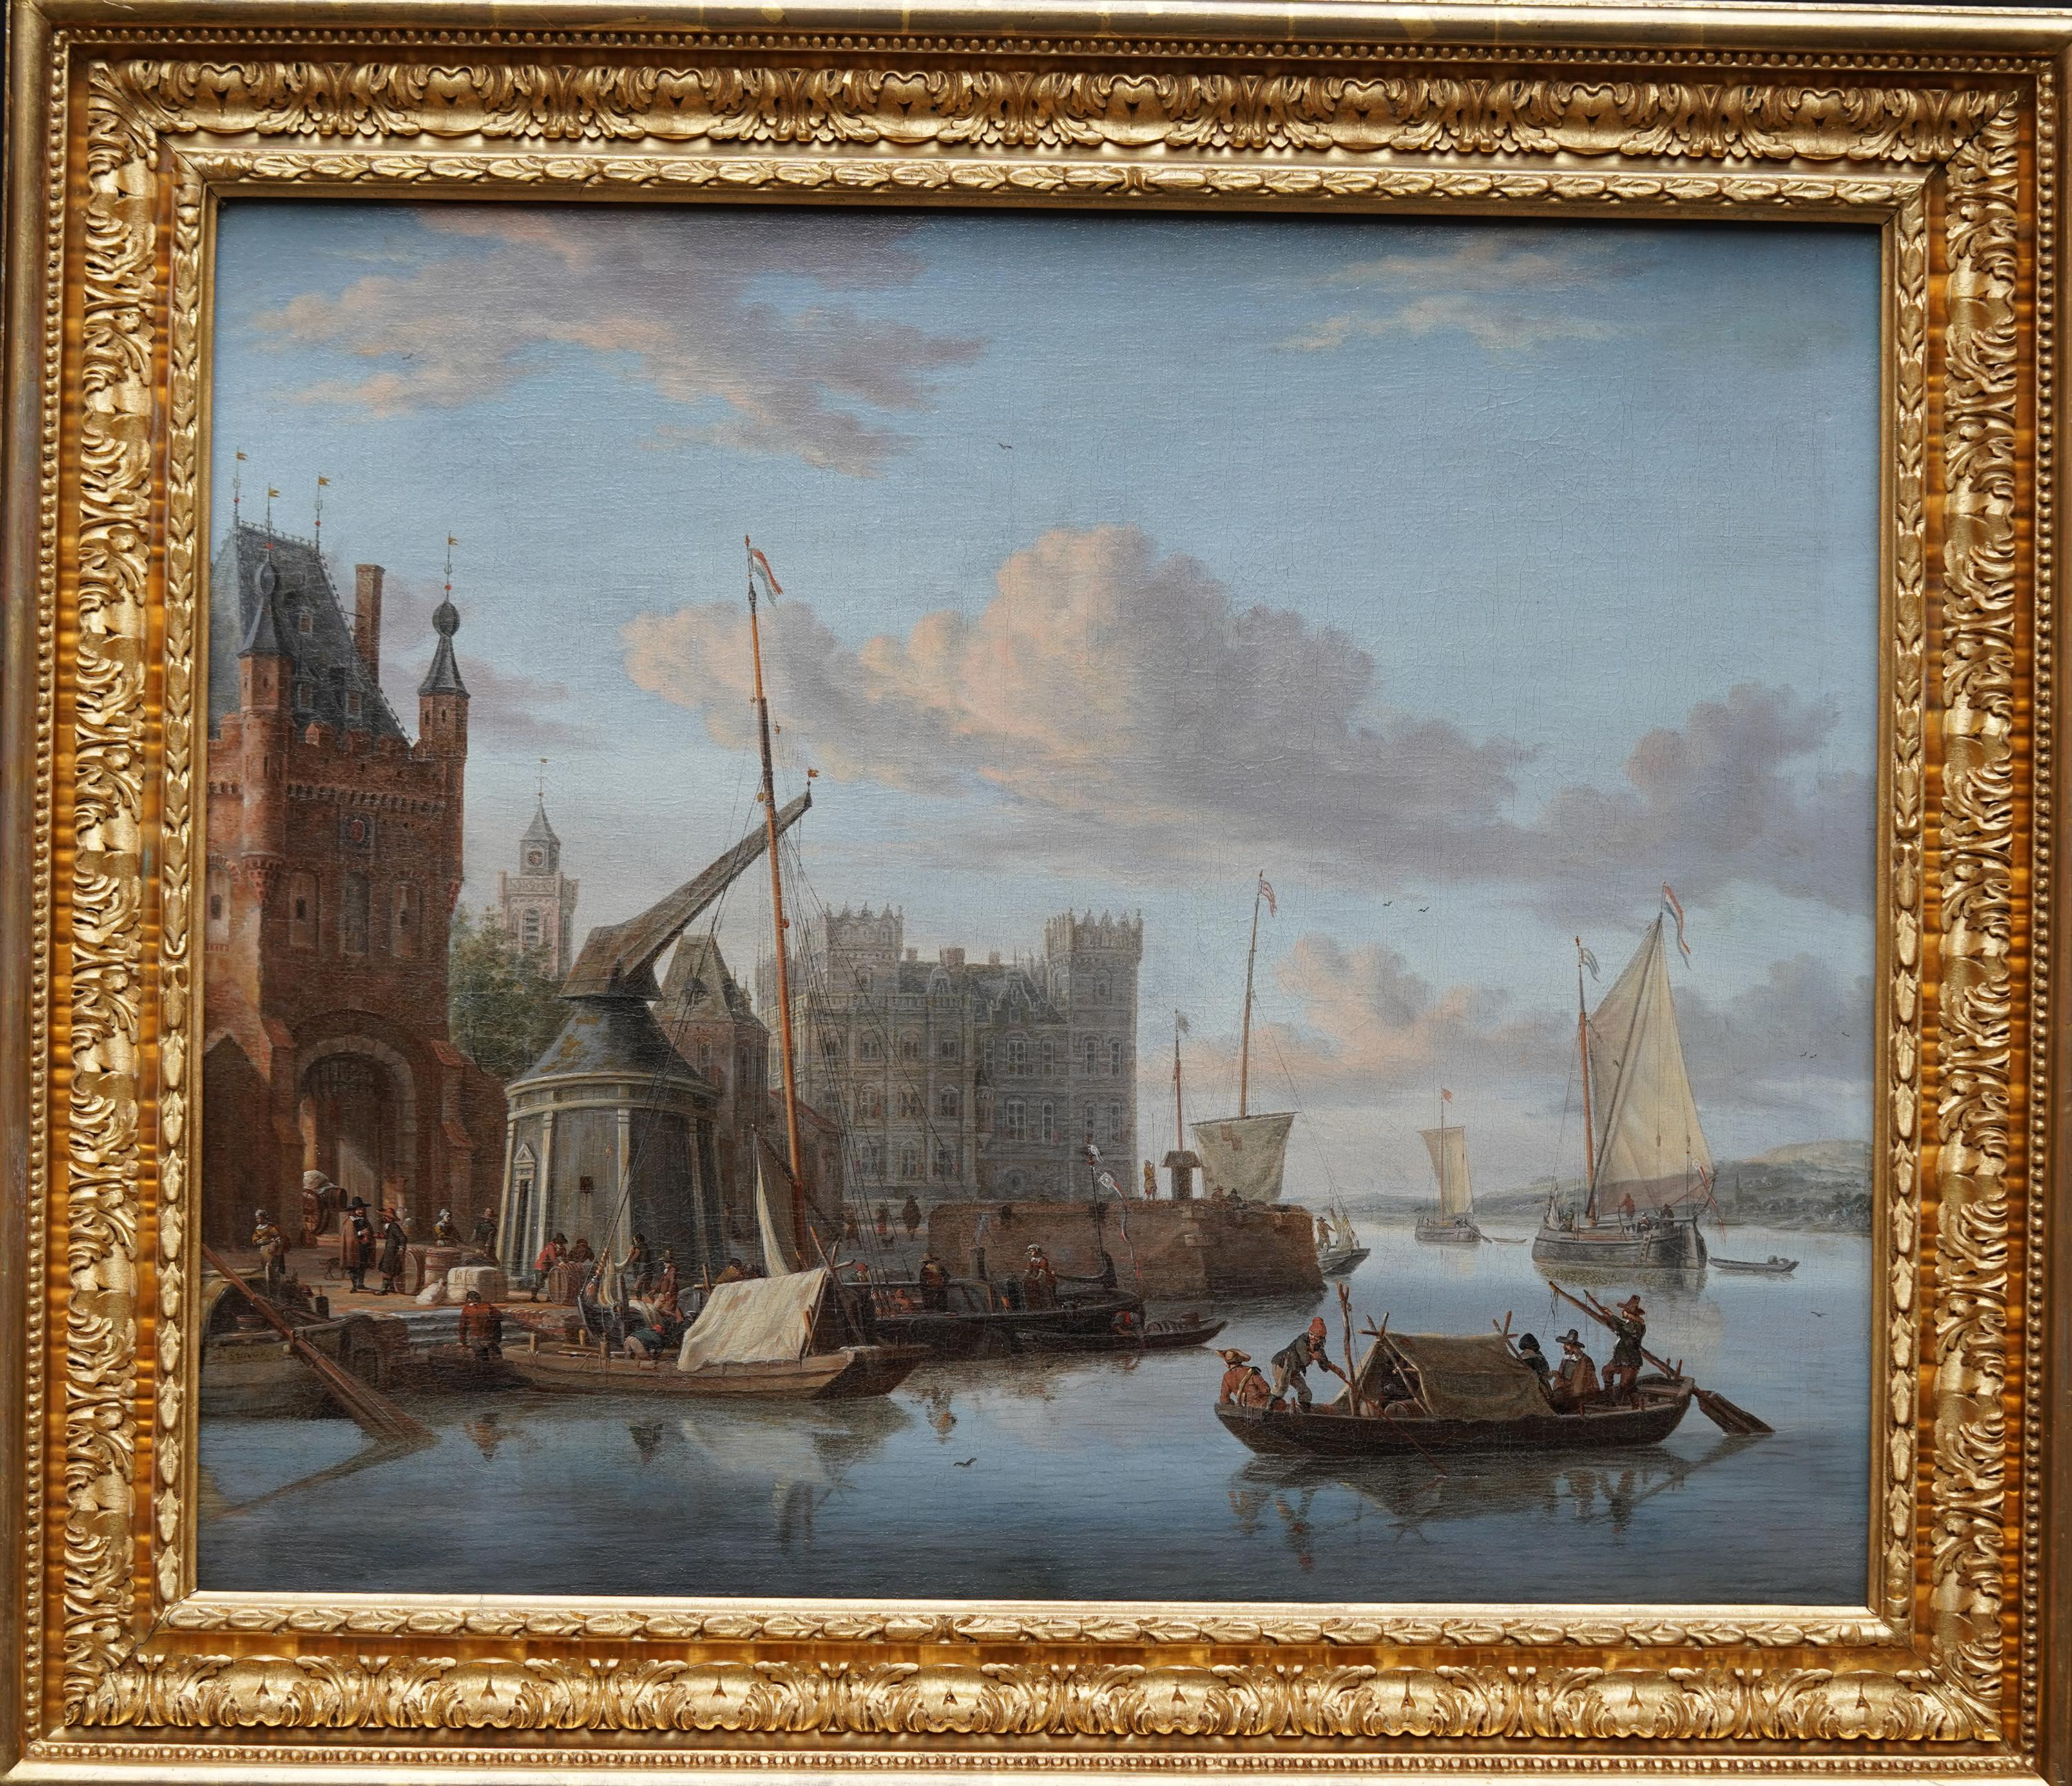 Jacobus Storck Figurative Painting - Amsterdam Harbour Scene with Figures Dutch 17th Century art marine oil painting